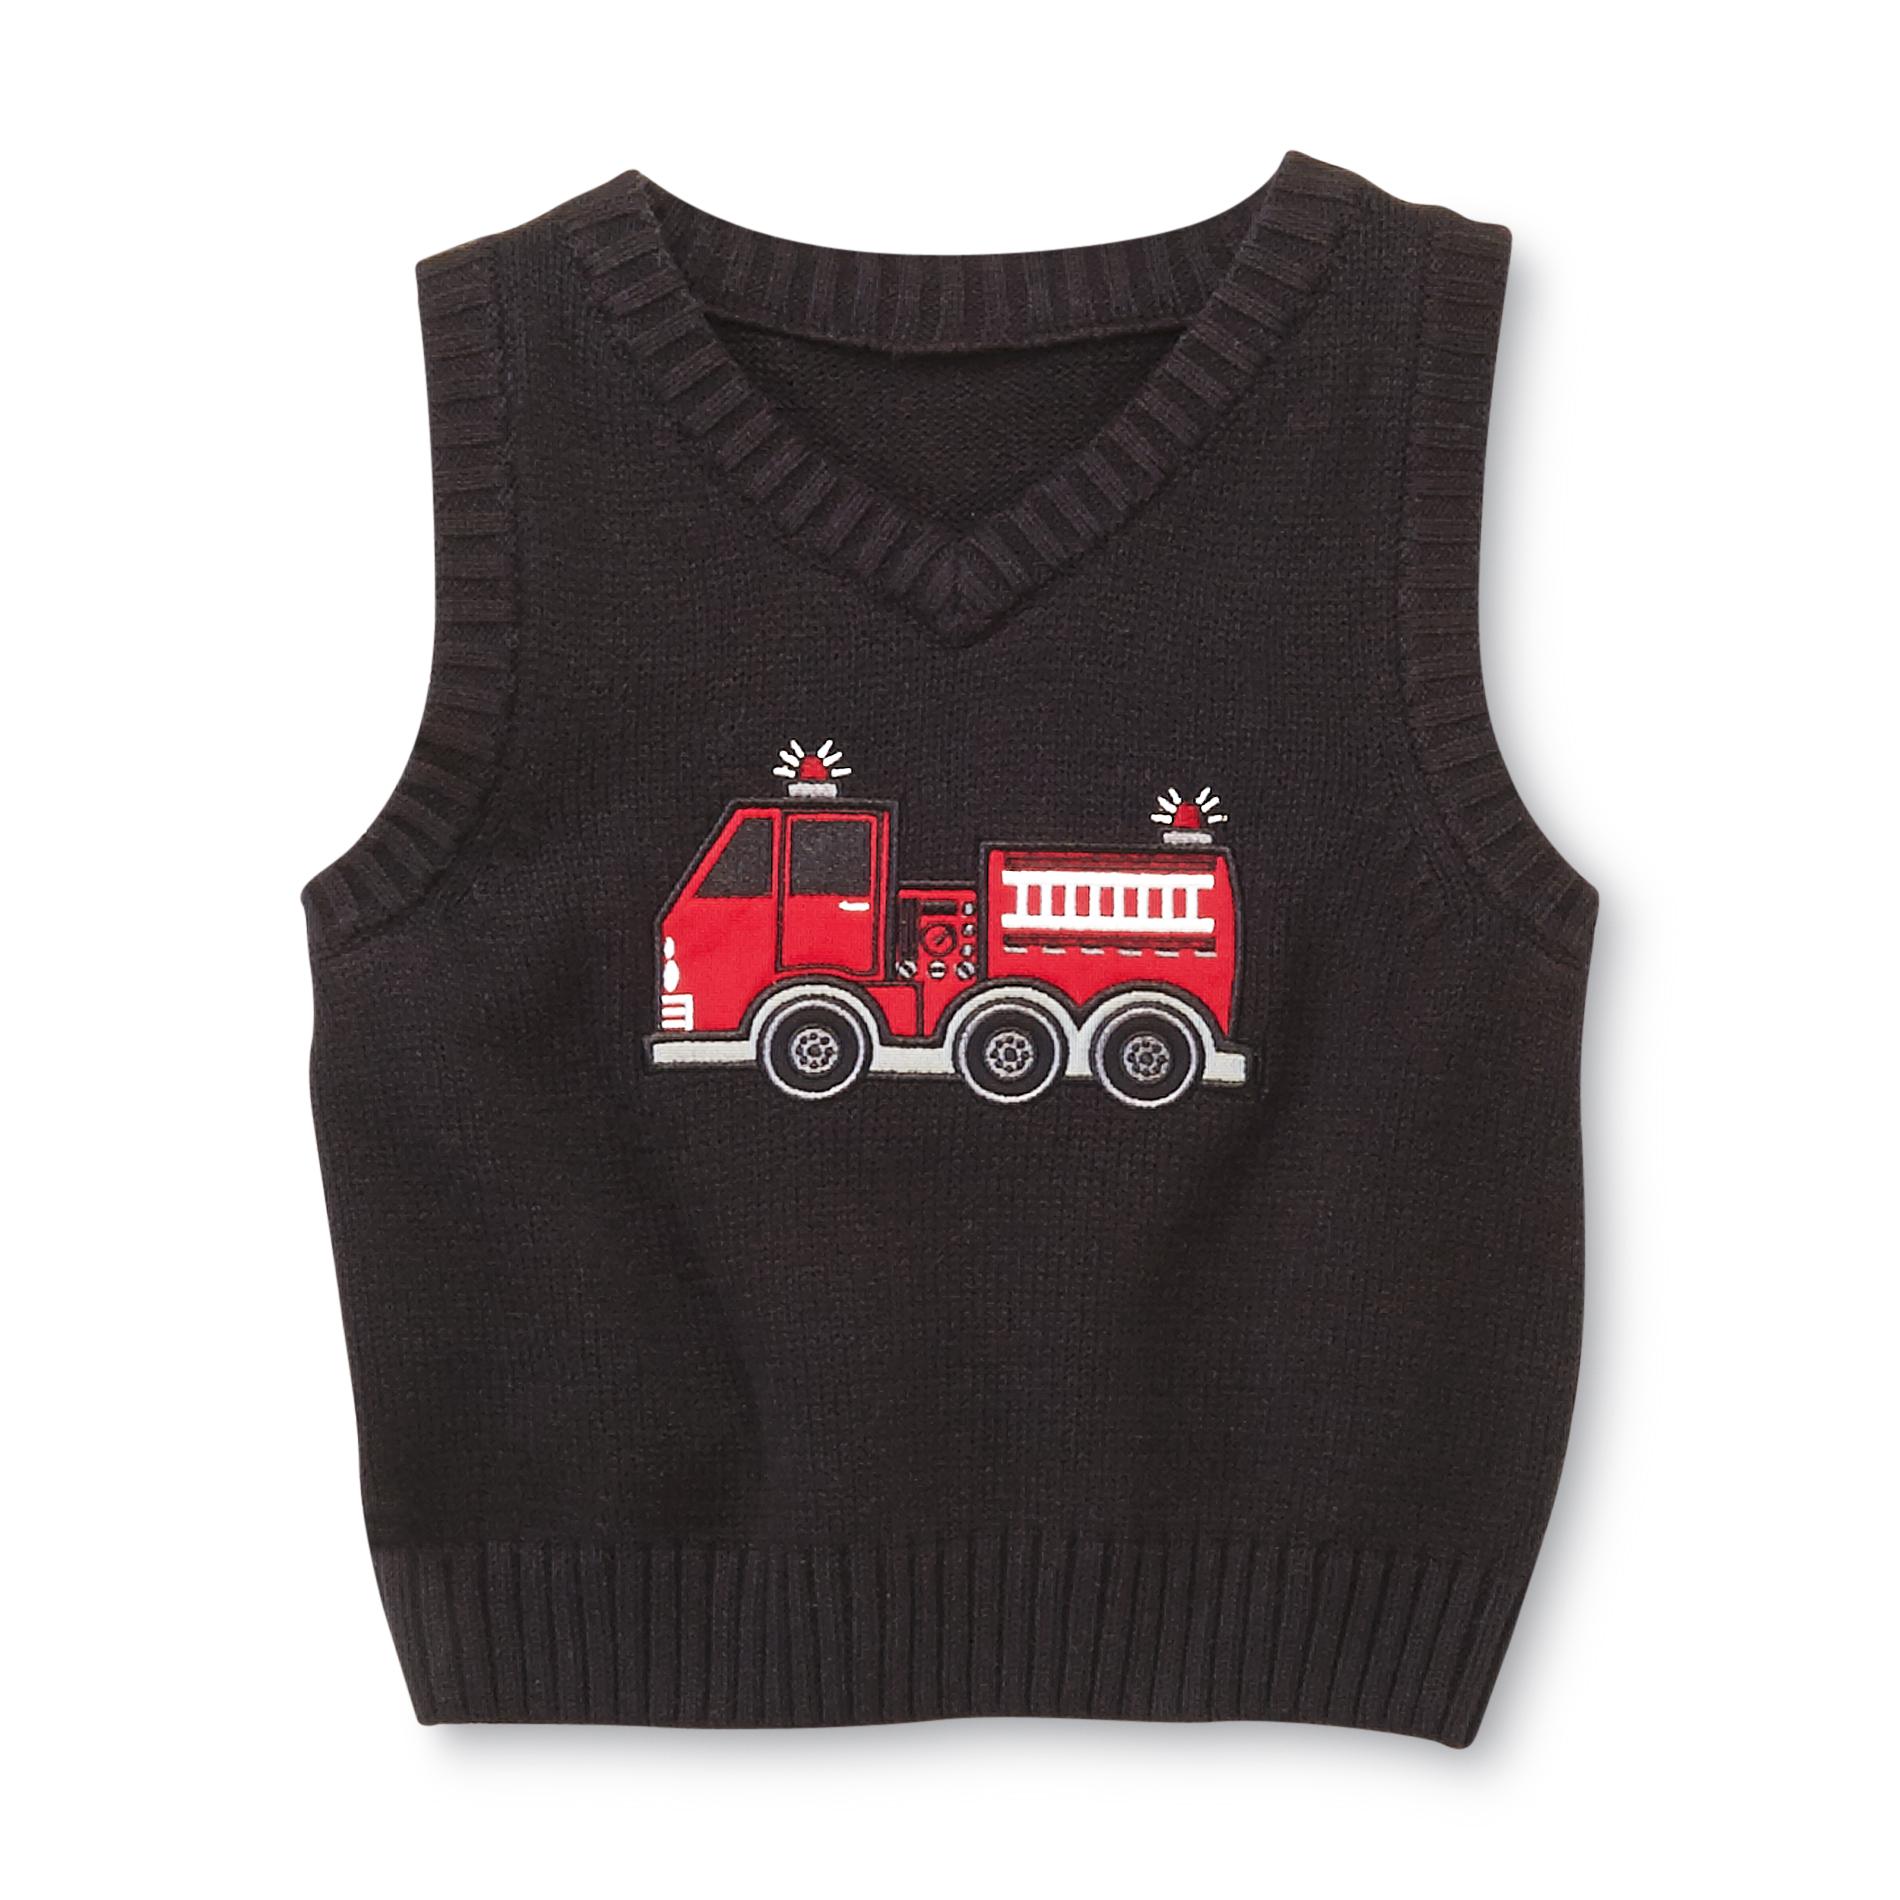 Holiday Editions Infant & Toddler Boy's Graphic Sweater Vest - Firetruck